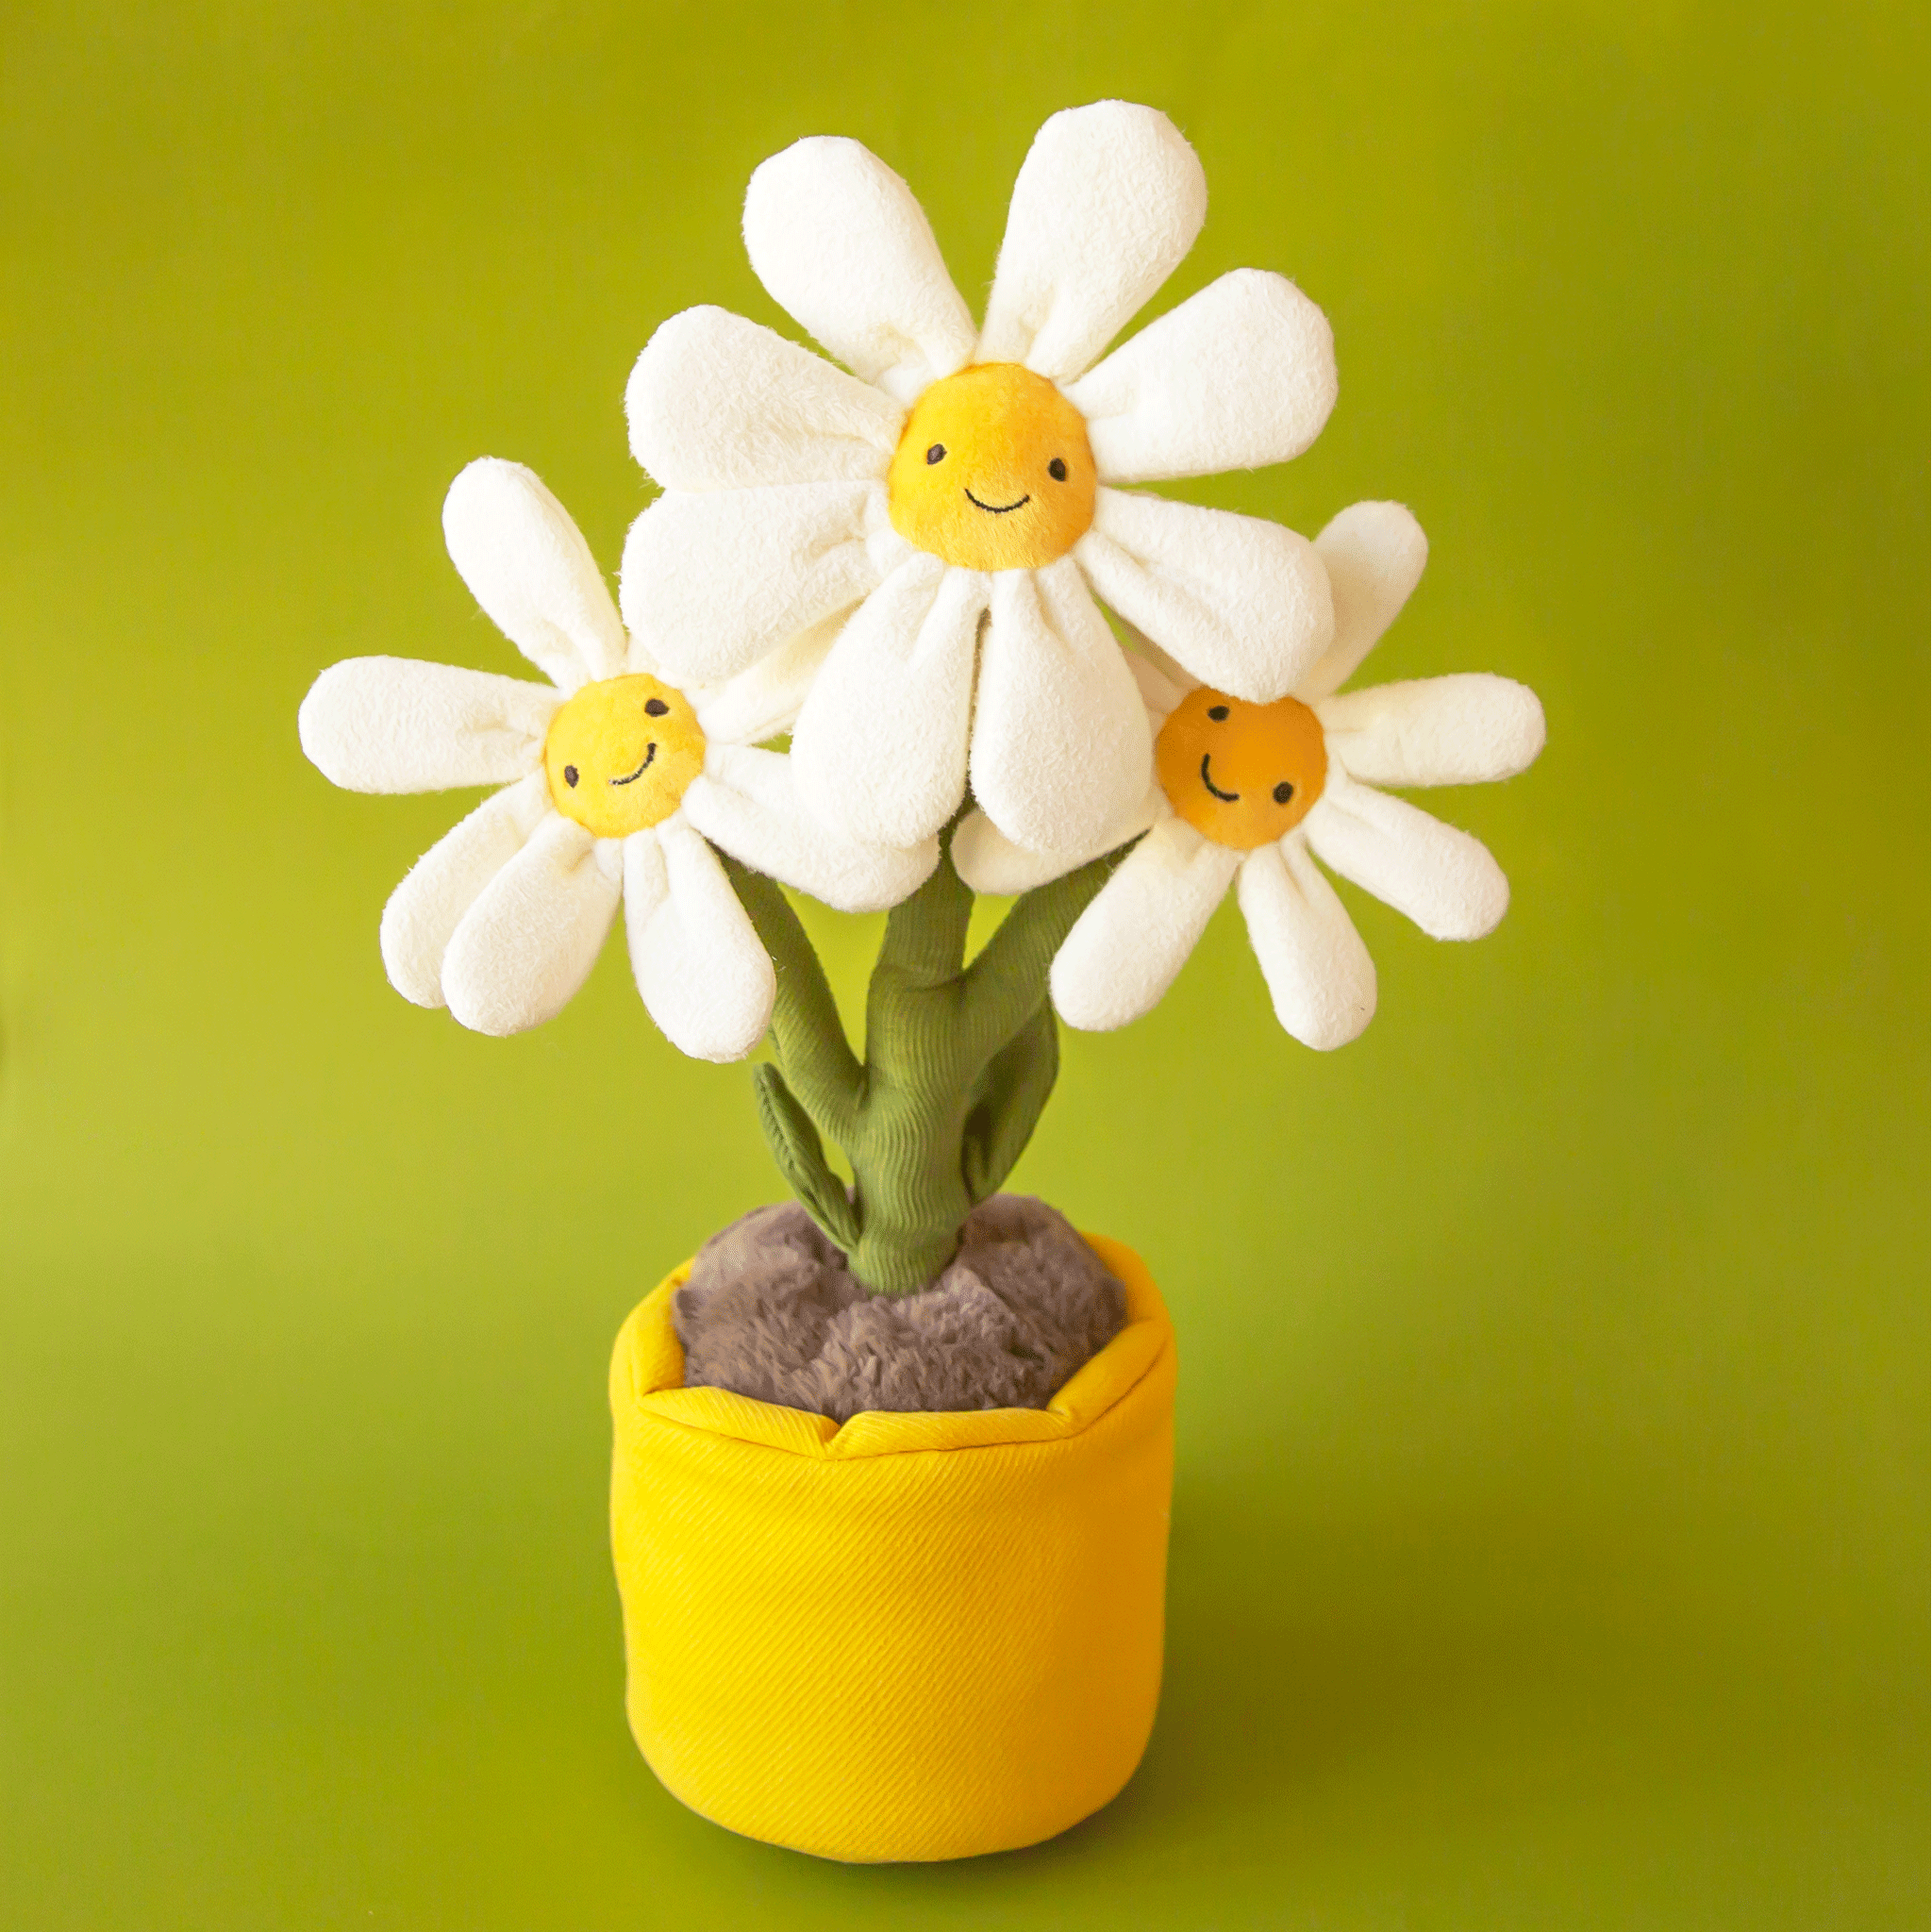 On a green background is a stuffed toy in the shape of three smiling face daisies in a stuffed toy pot.